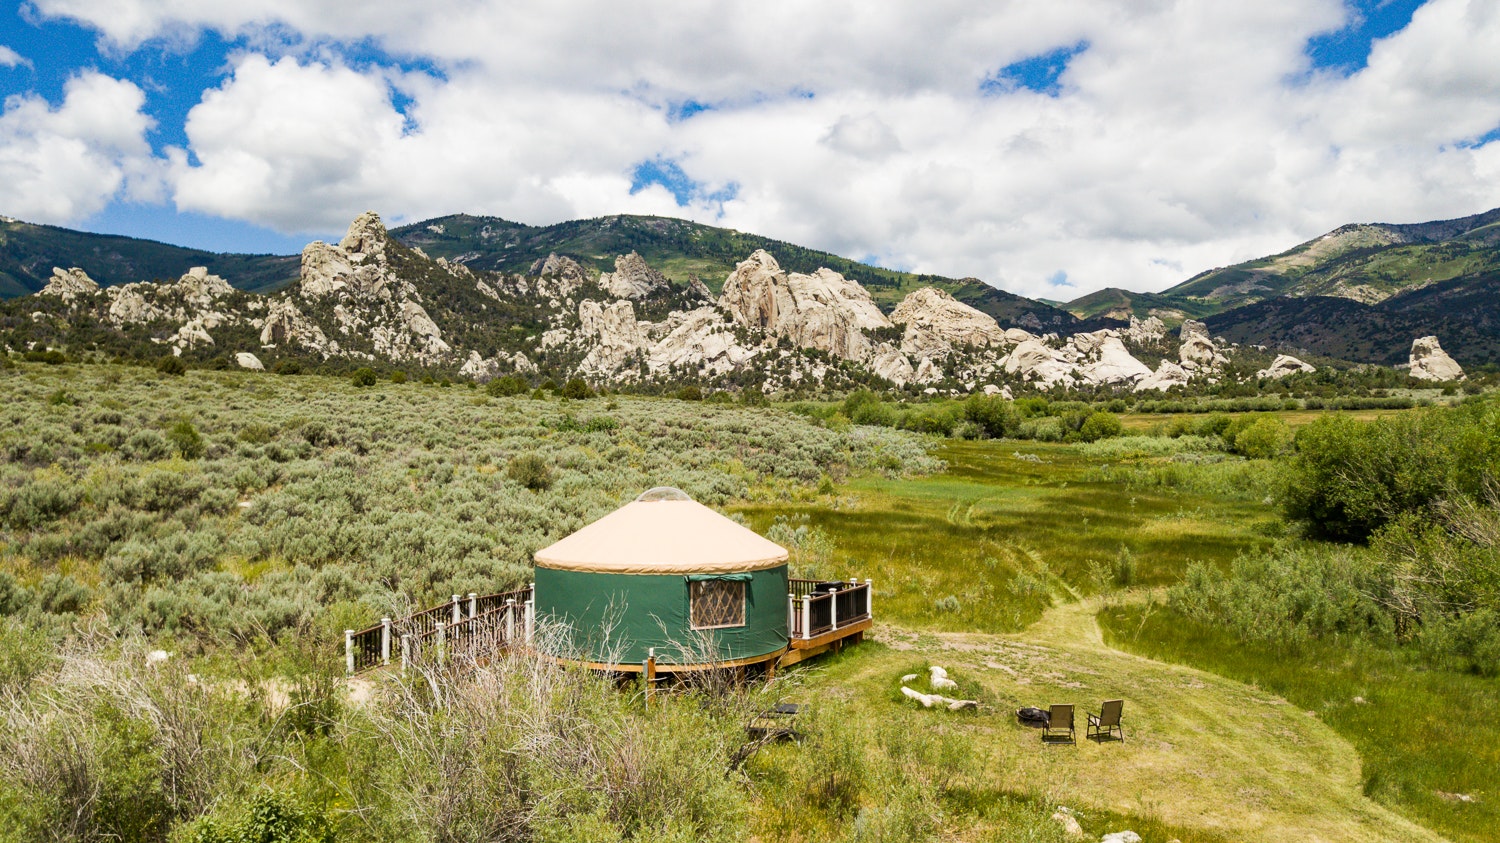 A yurt surrounded by grassland, with mountains in the background and puffy clouds above.